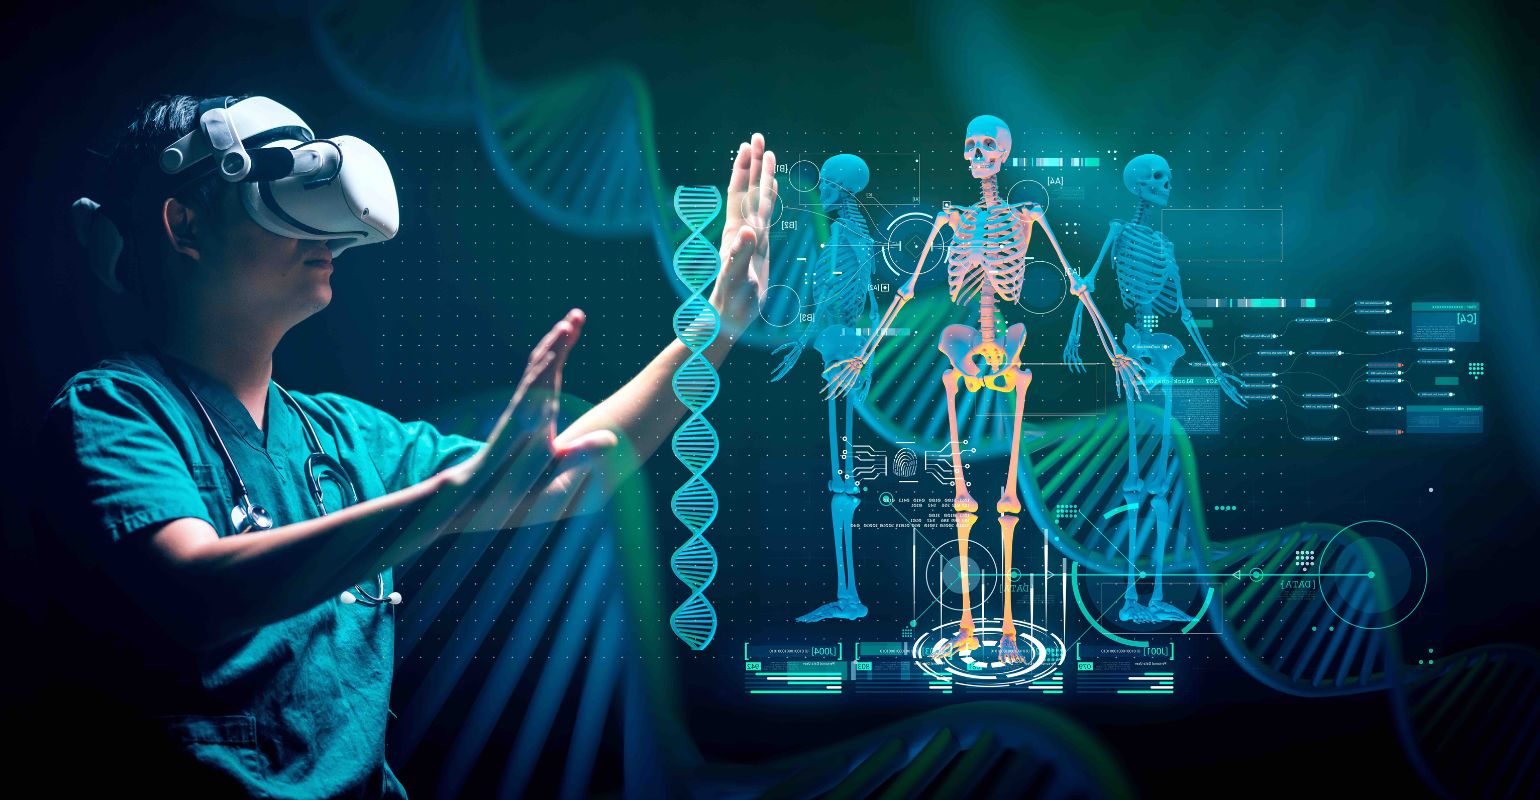 Healthcare metaverse: Merging technology with medicine